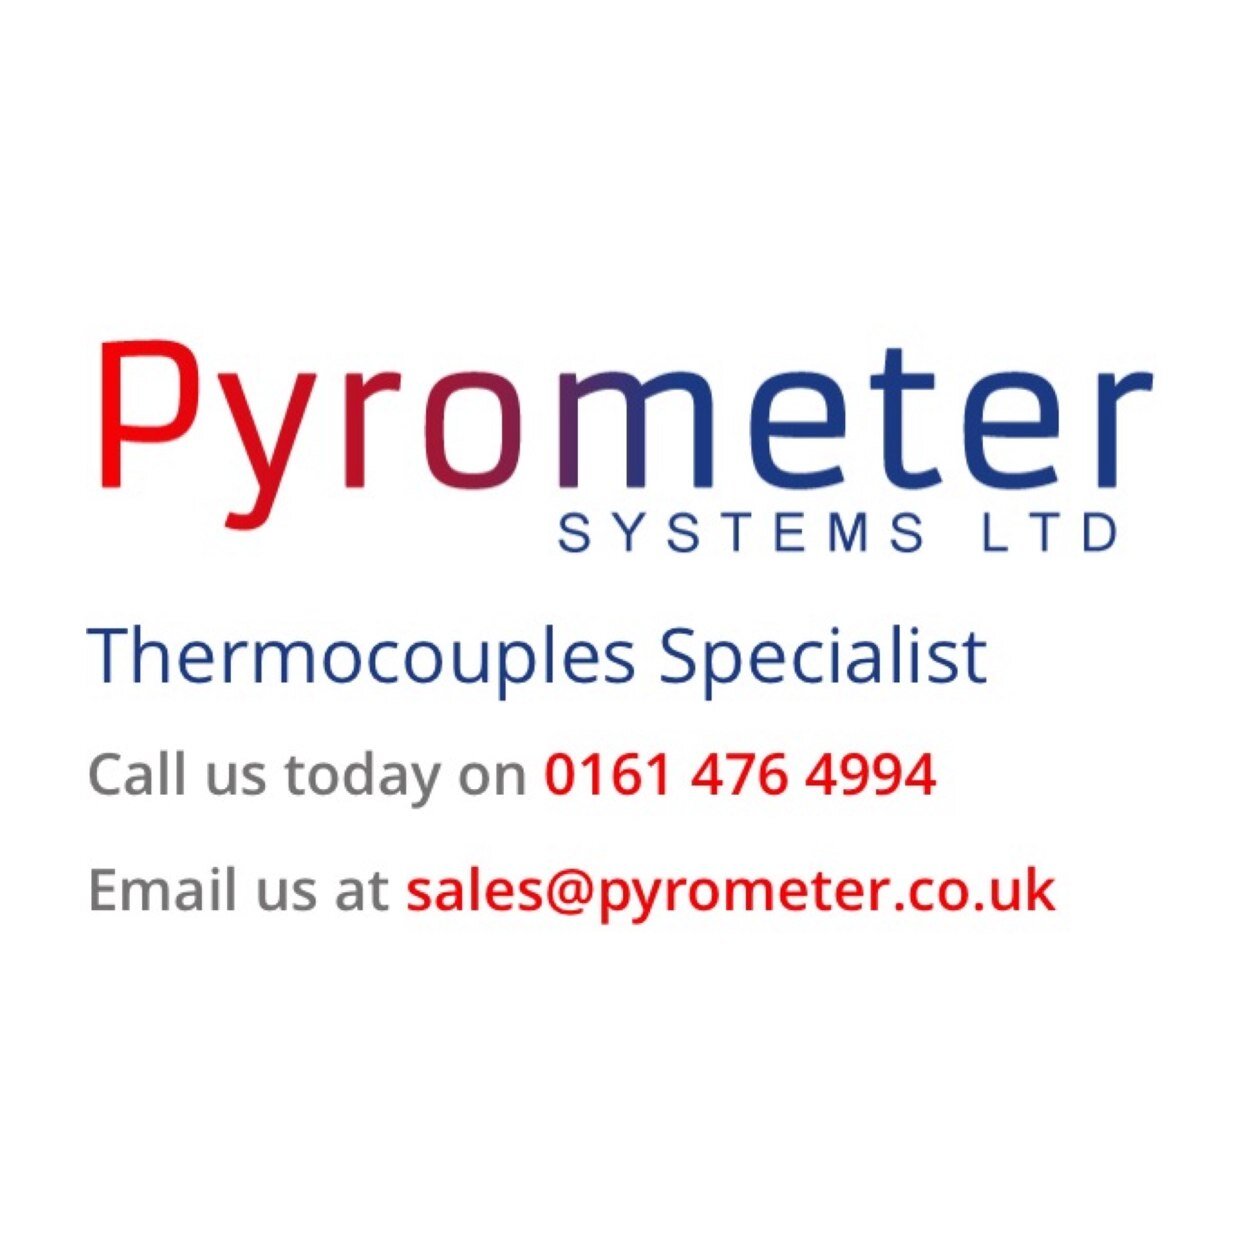 Authorised distributor for #Honeywell Industrial Measurement and Control Instrumentation, and manufacturer of bespoke temperature sensors